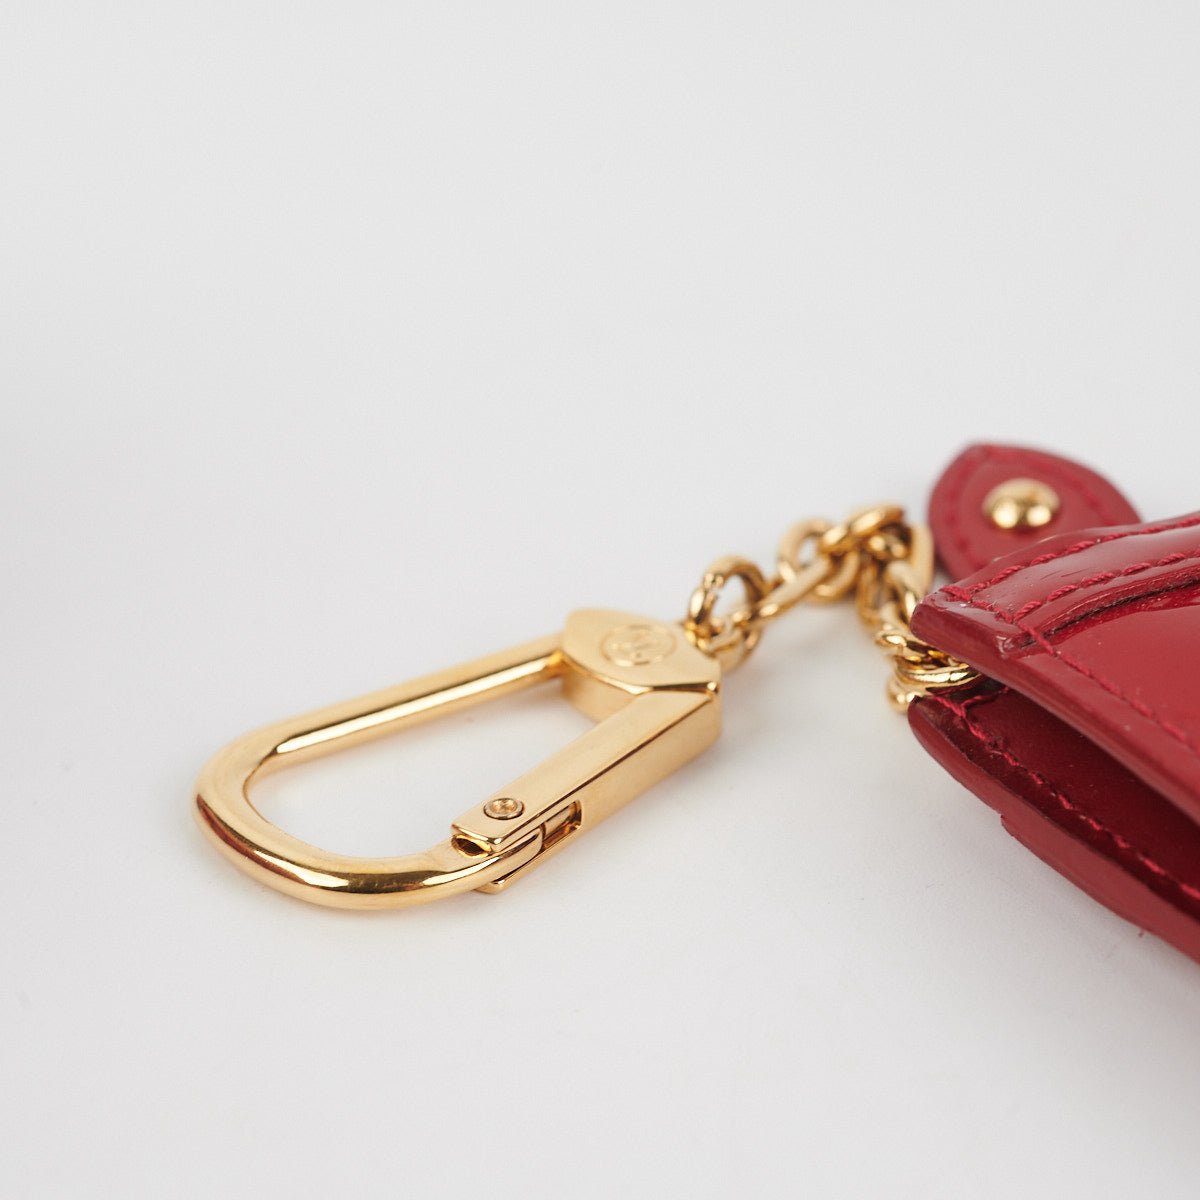 Key pouch leather small bag Louis Vuitton Red in Leather - 26457326